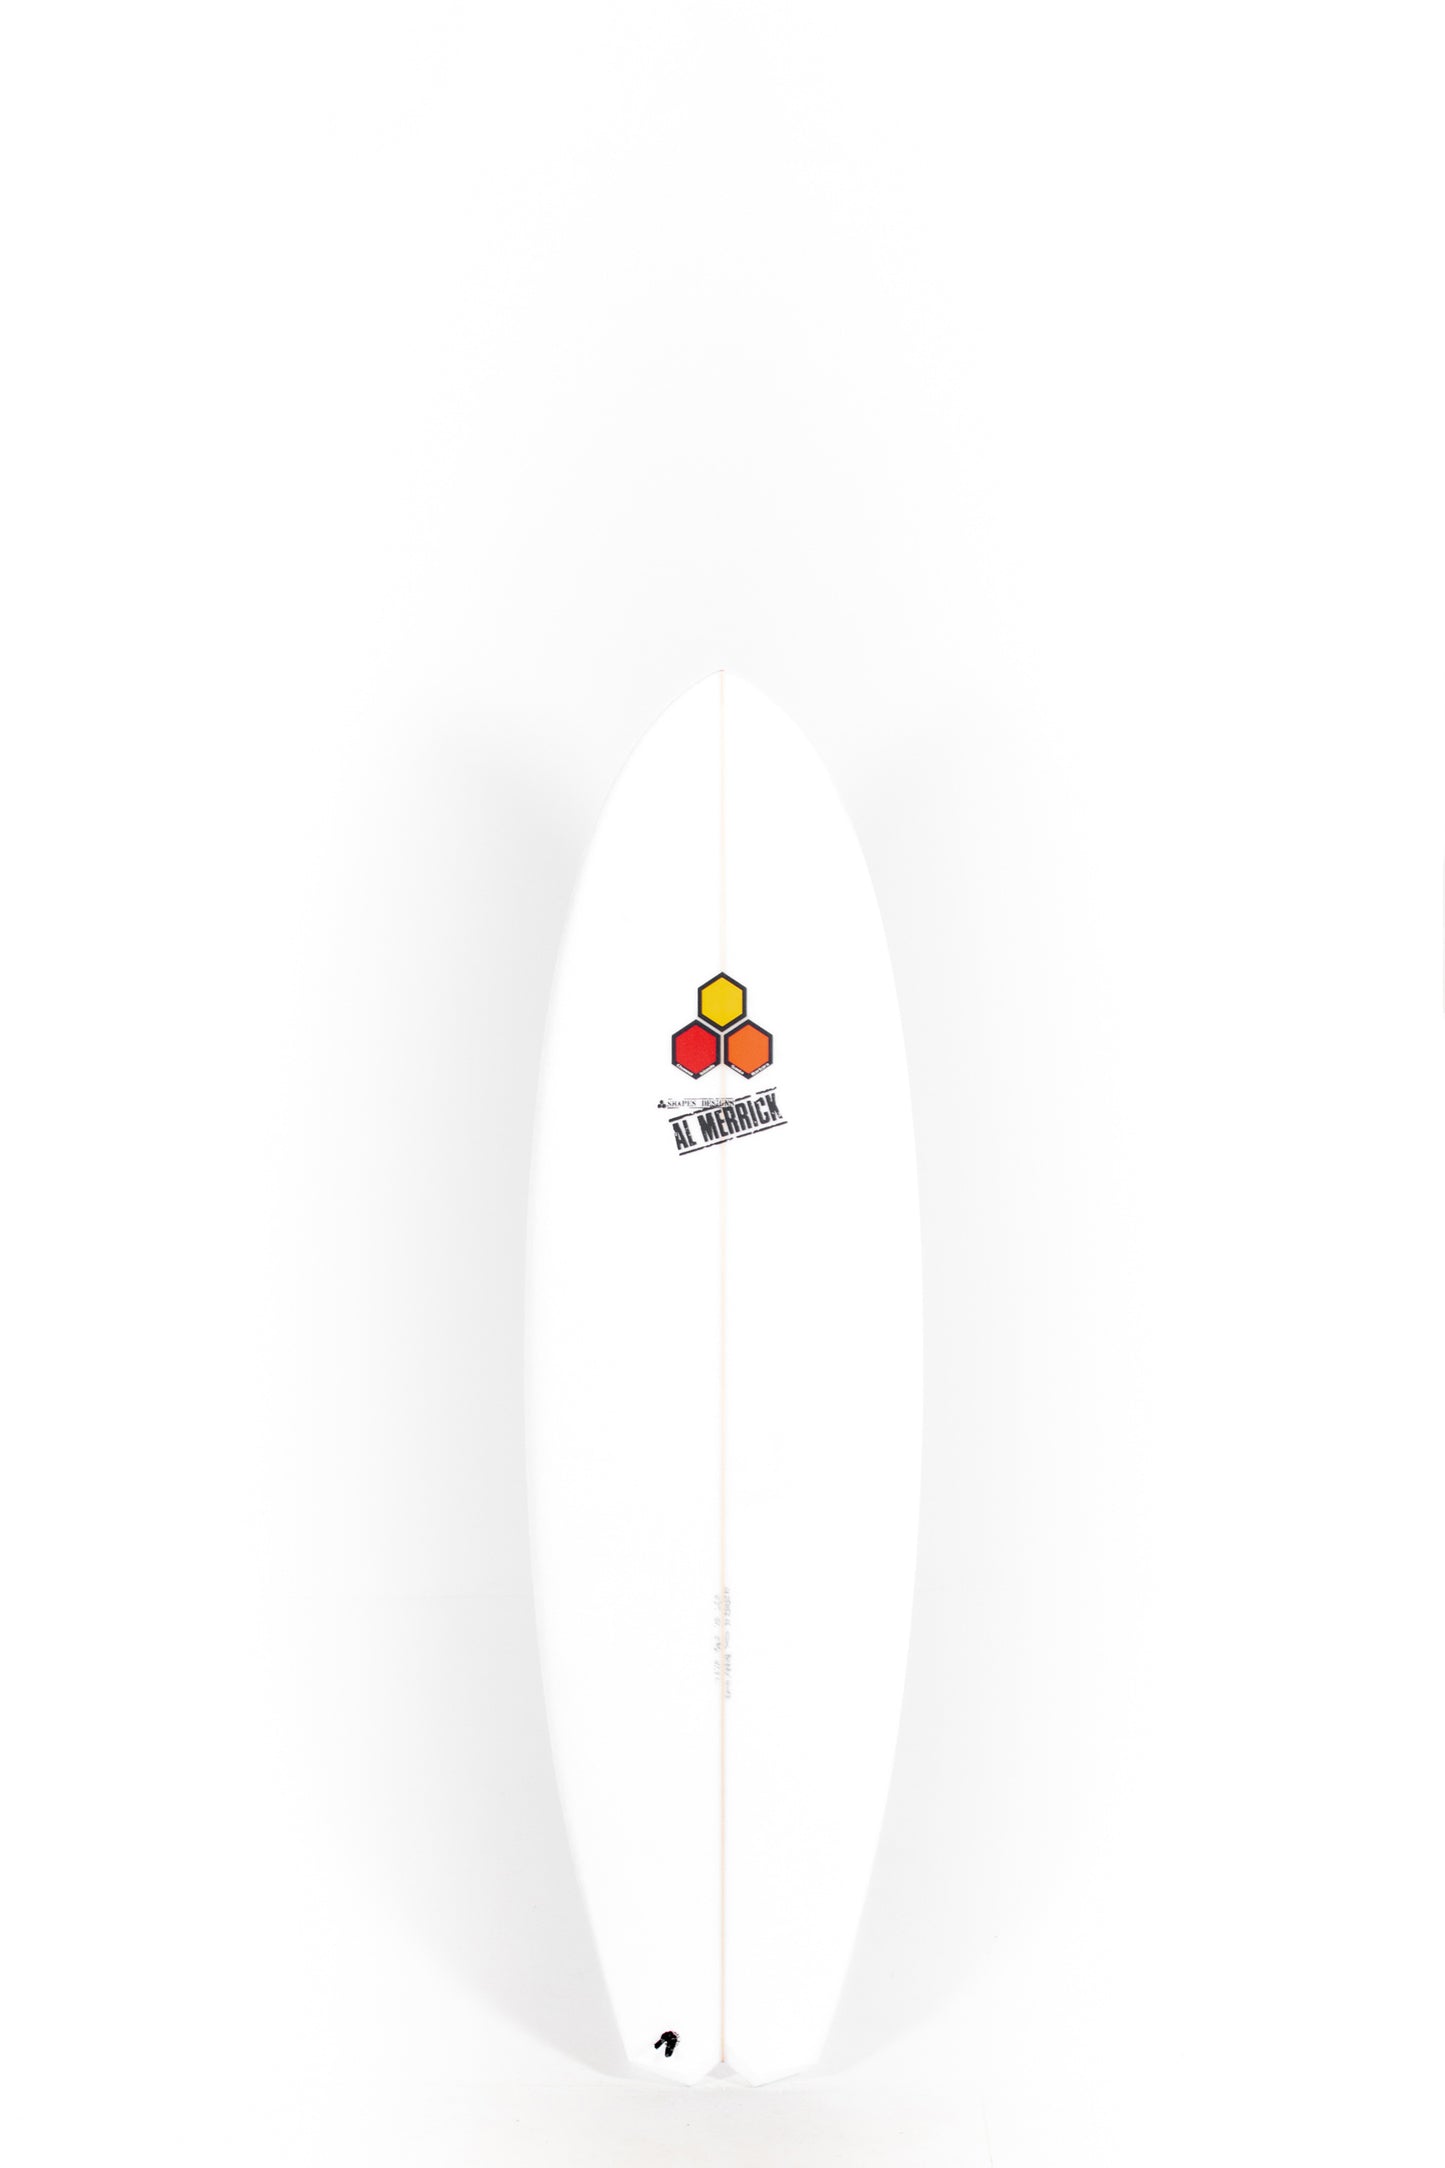 Channel Islands - BOBBY QUAD - 6'2